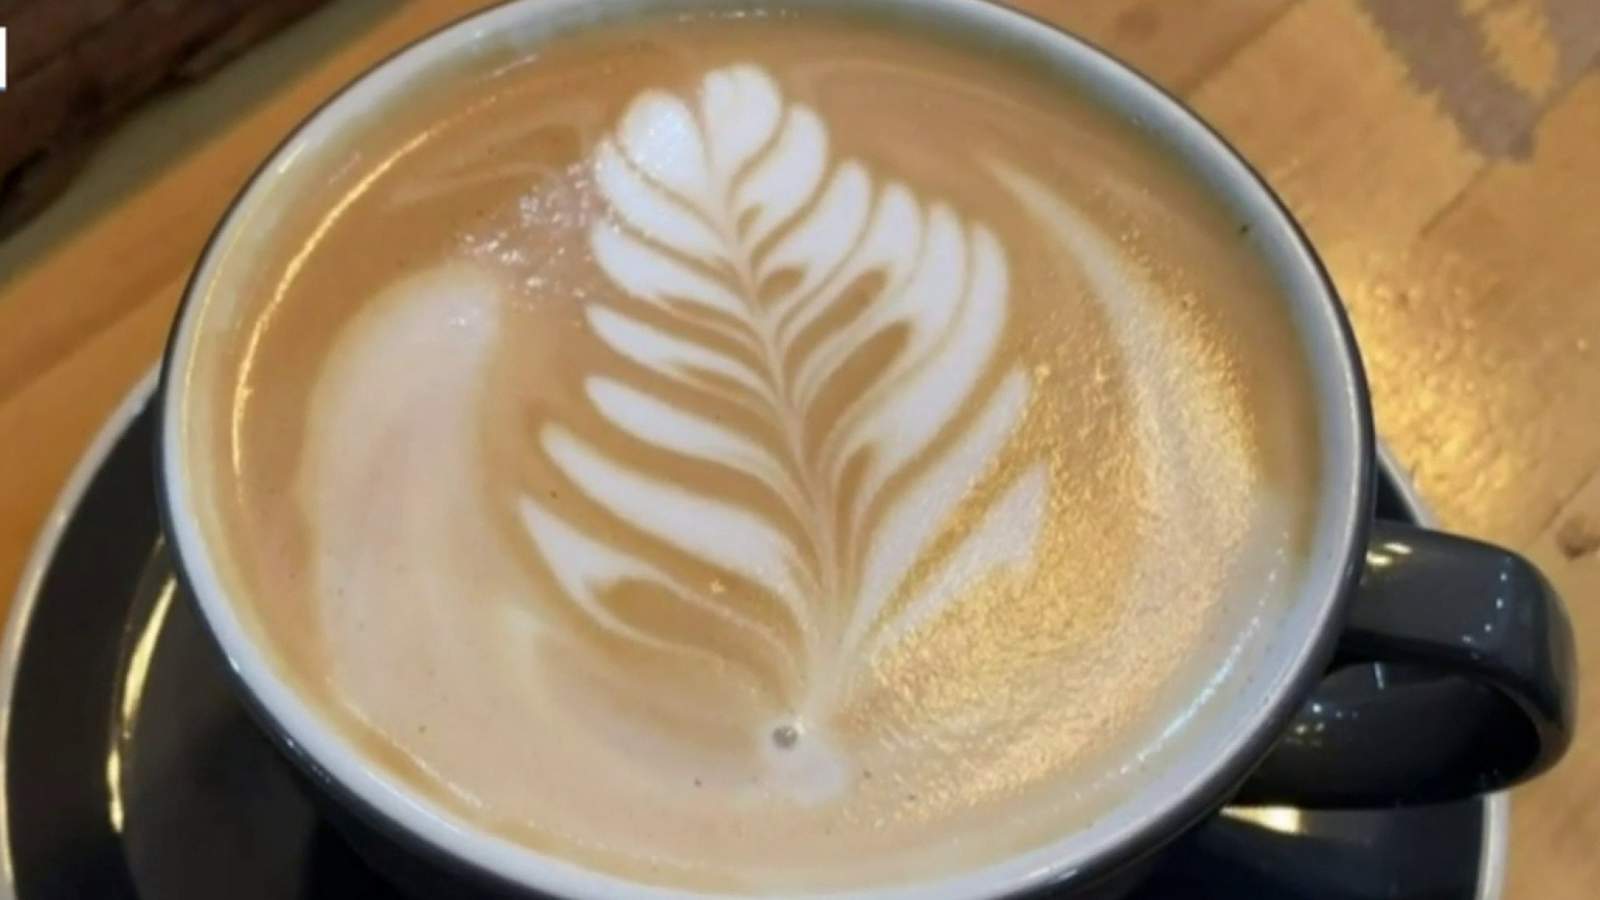 National Coffee Day: Here’s where to get a free cup